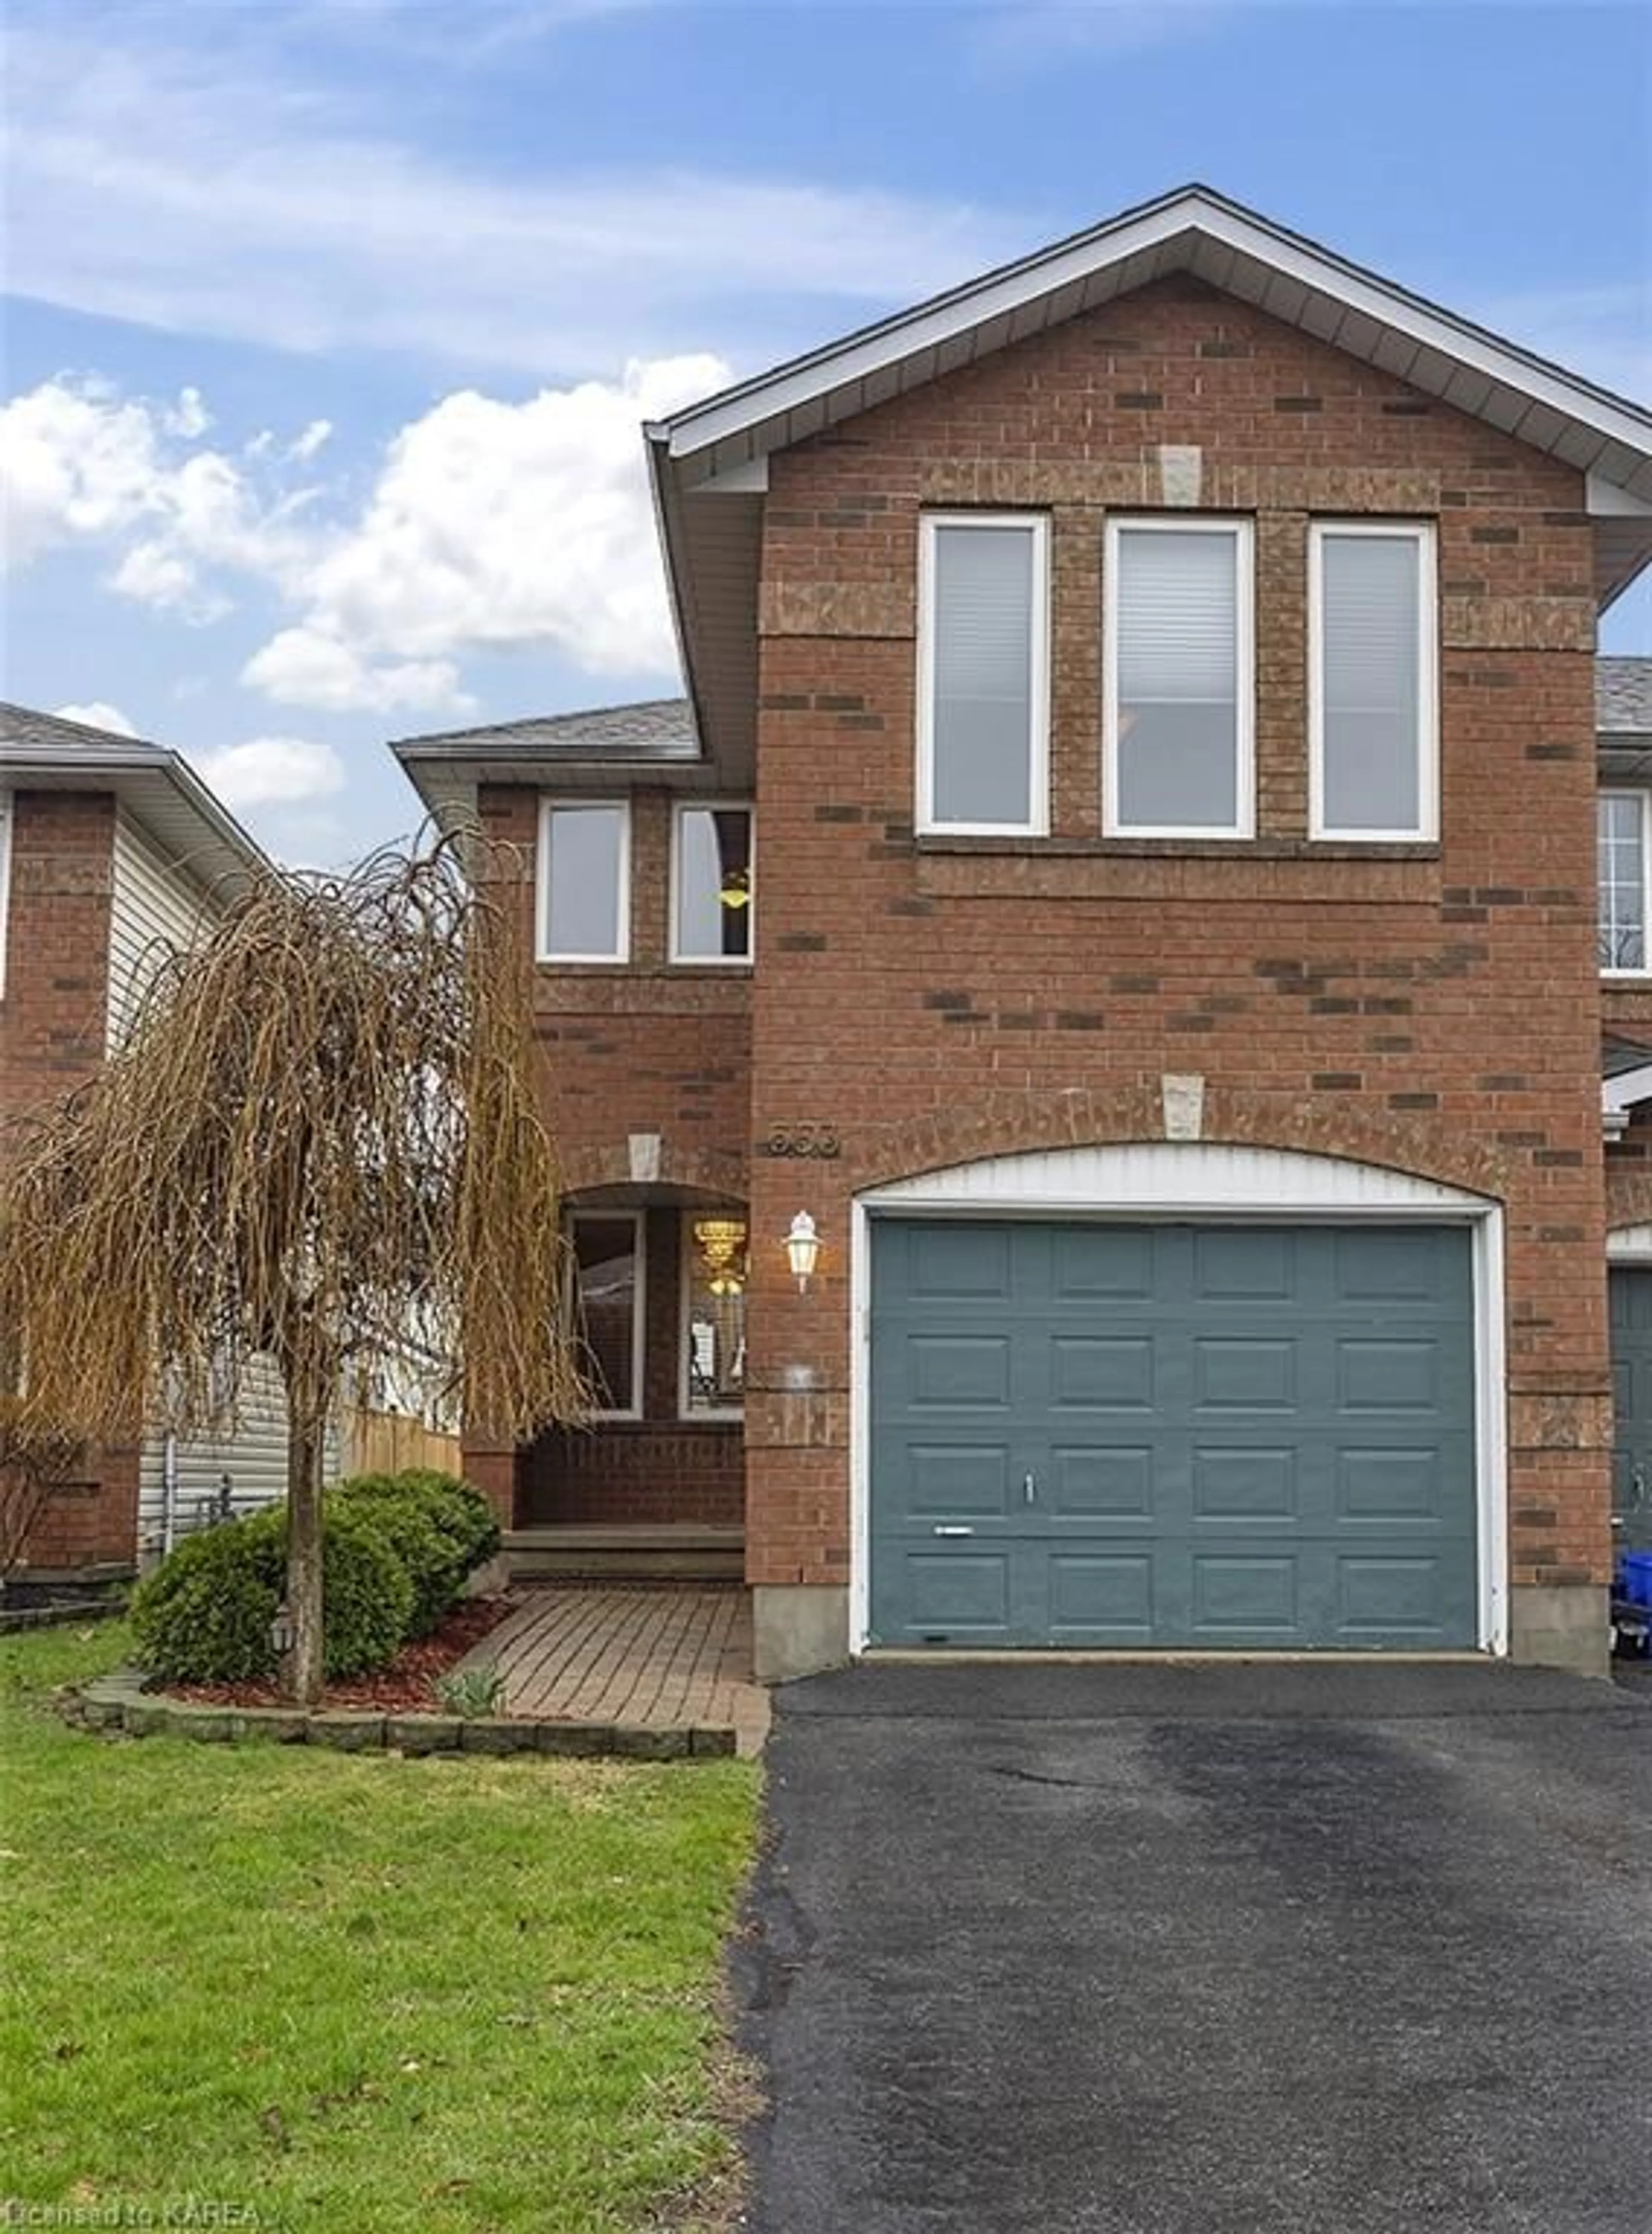 Home with brick exterior material for 553 Quail Crt, Kingston Ontario K7M 8Z4